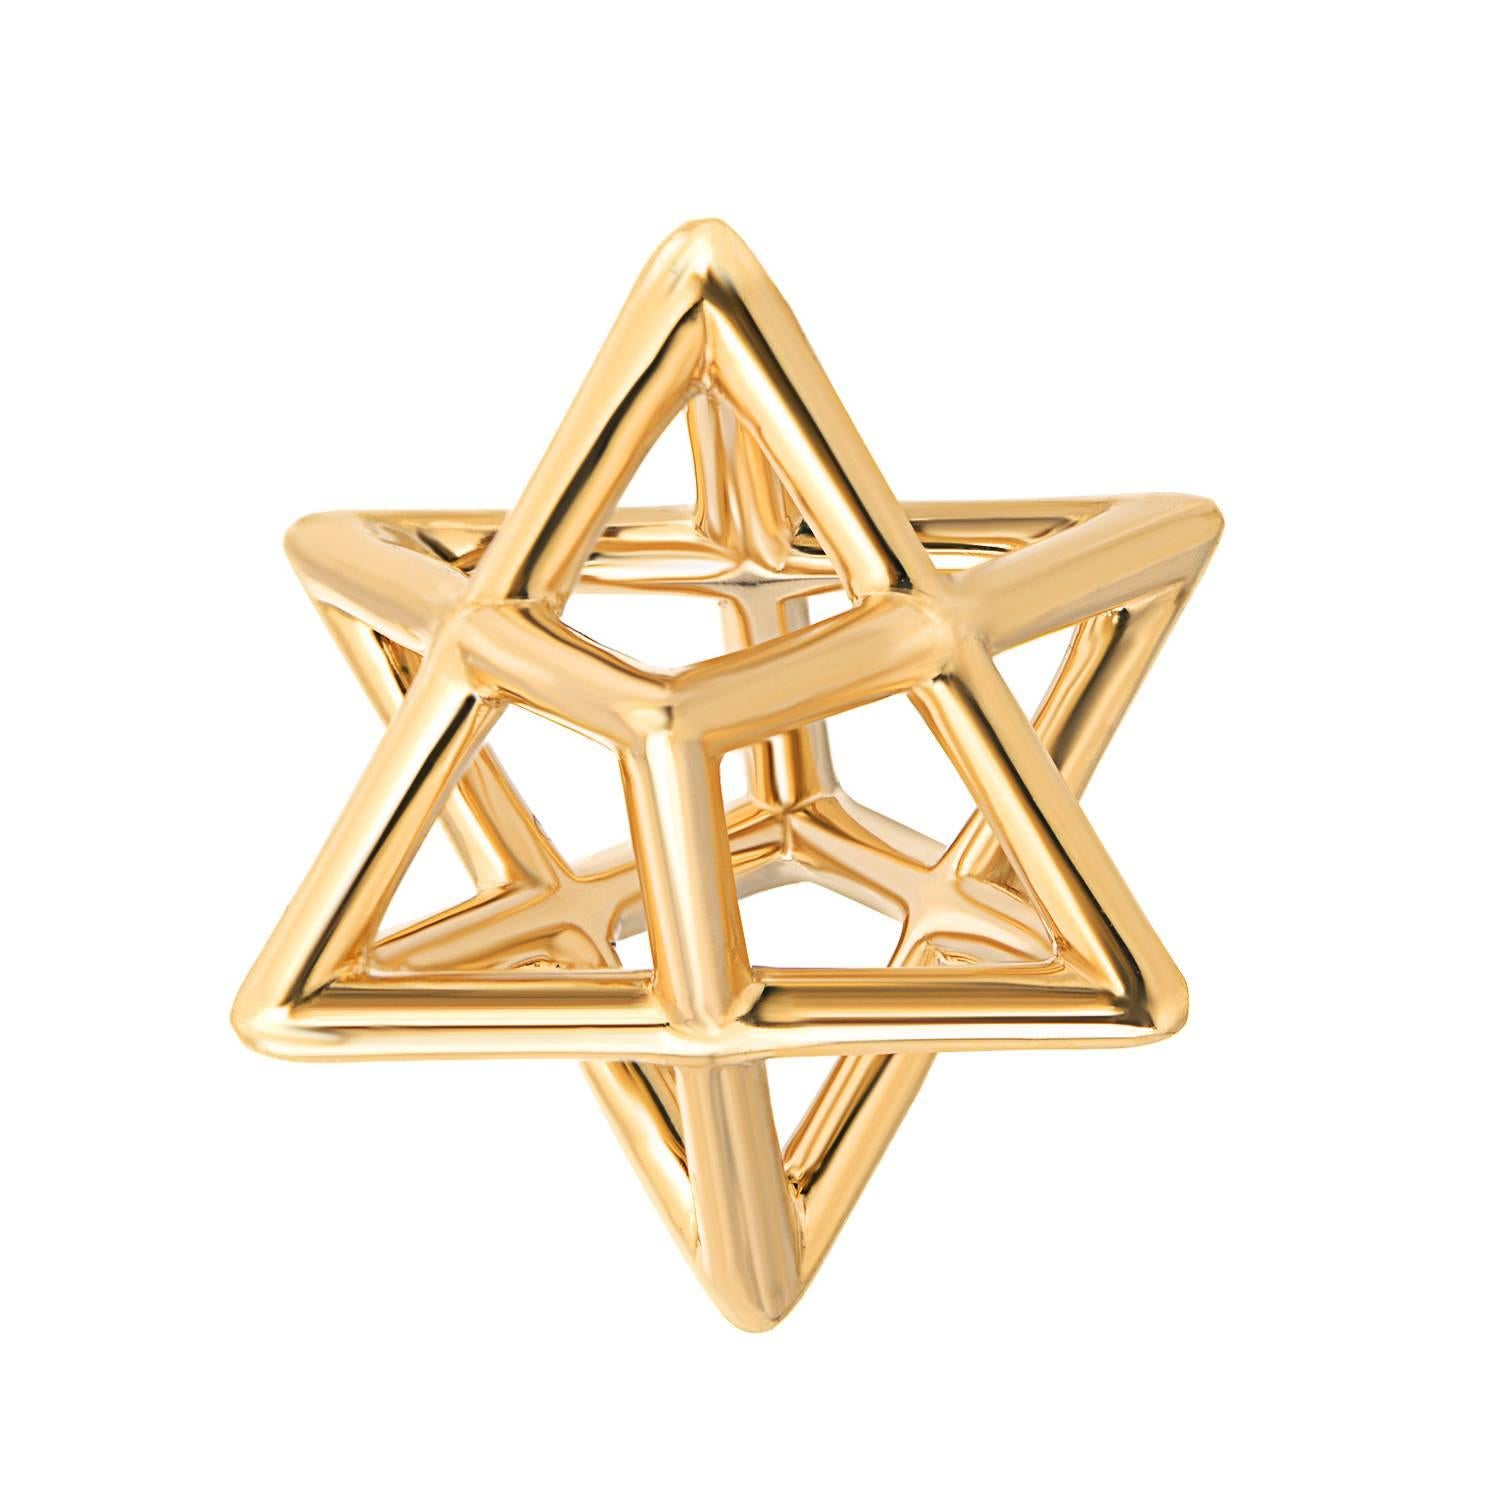 The Merkaba 18K yellow gold necklace, is a heirloom-quality, sacred geometric three dimensional jewelry piece, highlighting superb attention to detail and extraordinary polish, symmetry and equilibrium. It suspends elegantly at the chest, measuring